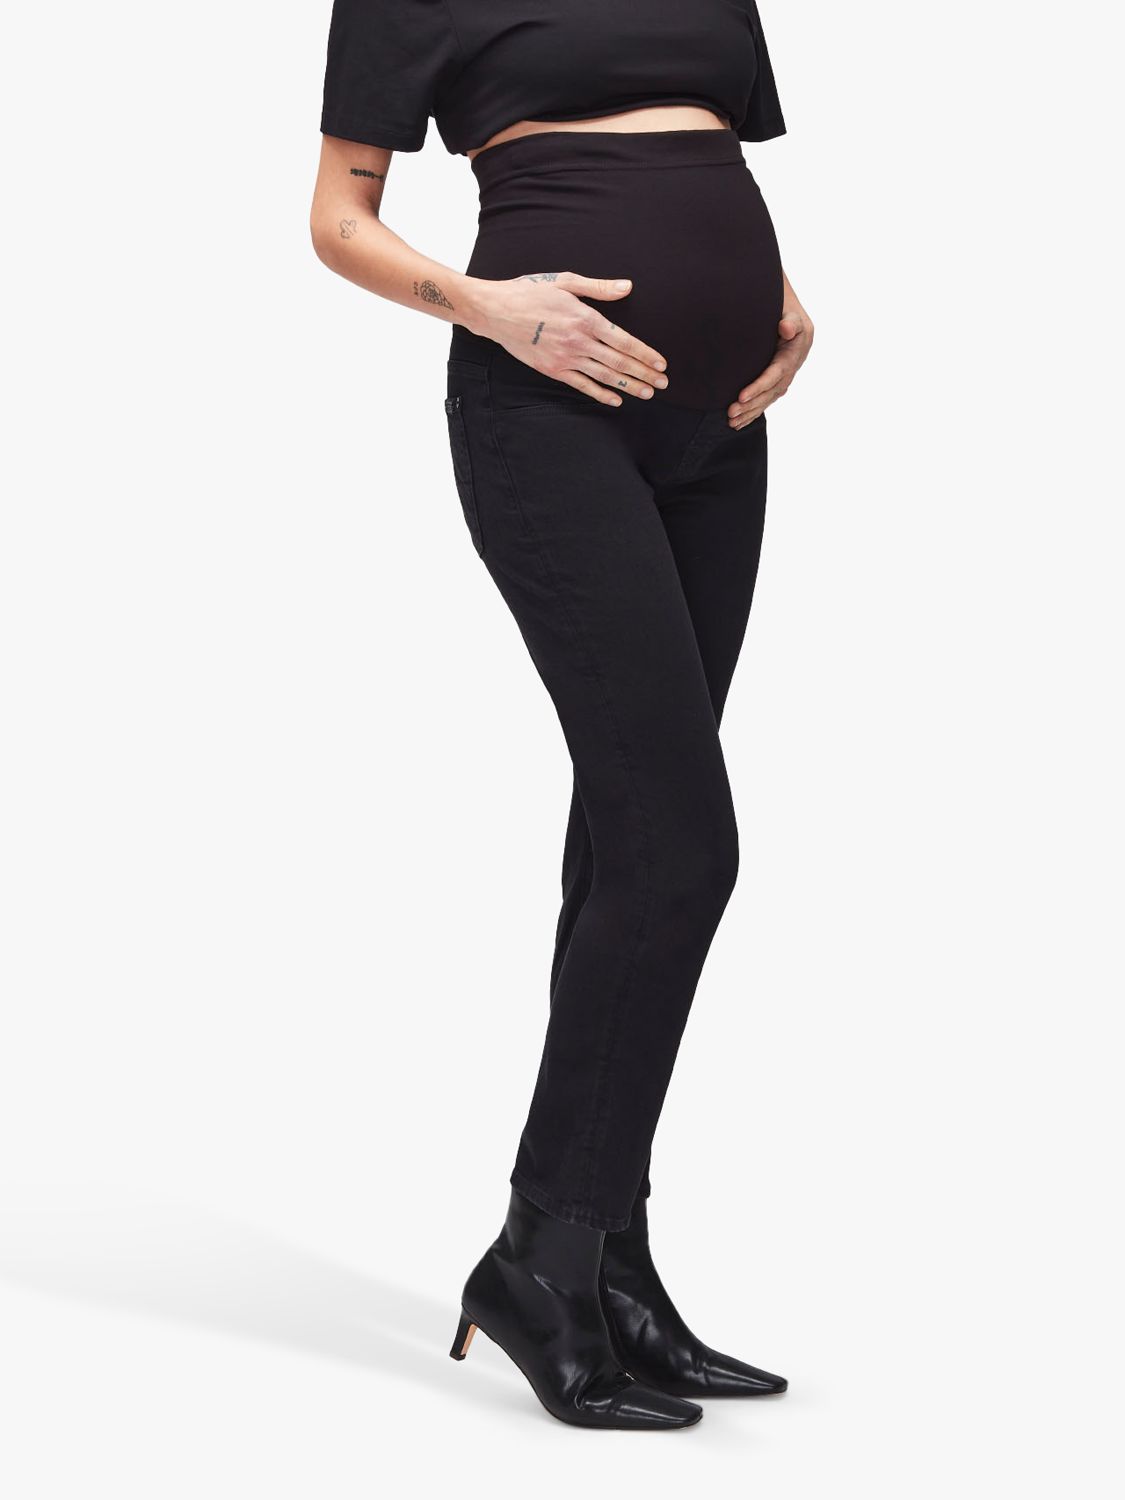 7 For All Mankind Straight Cut Maternity Jeans, Black, 26